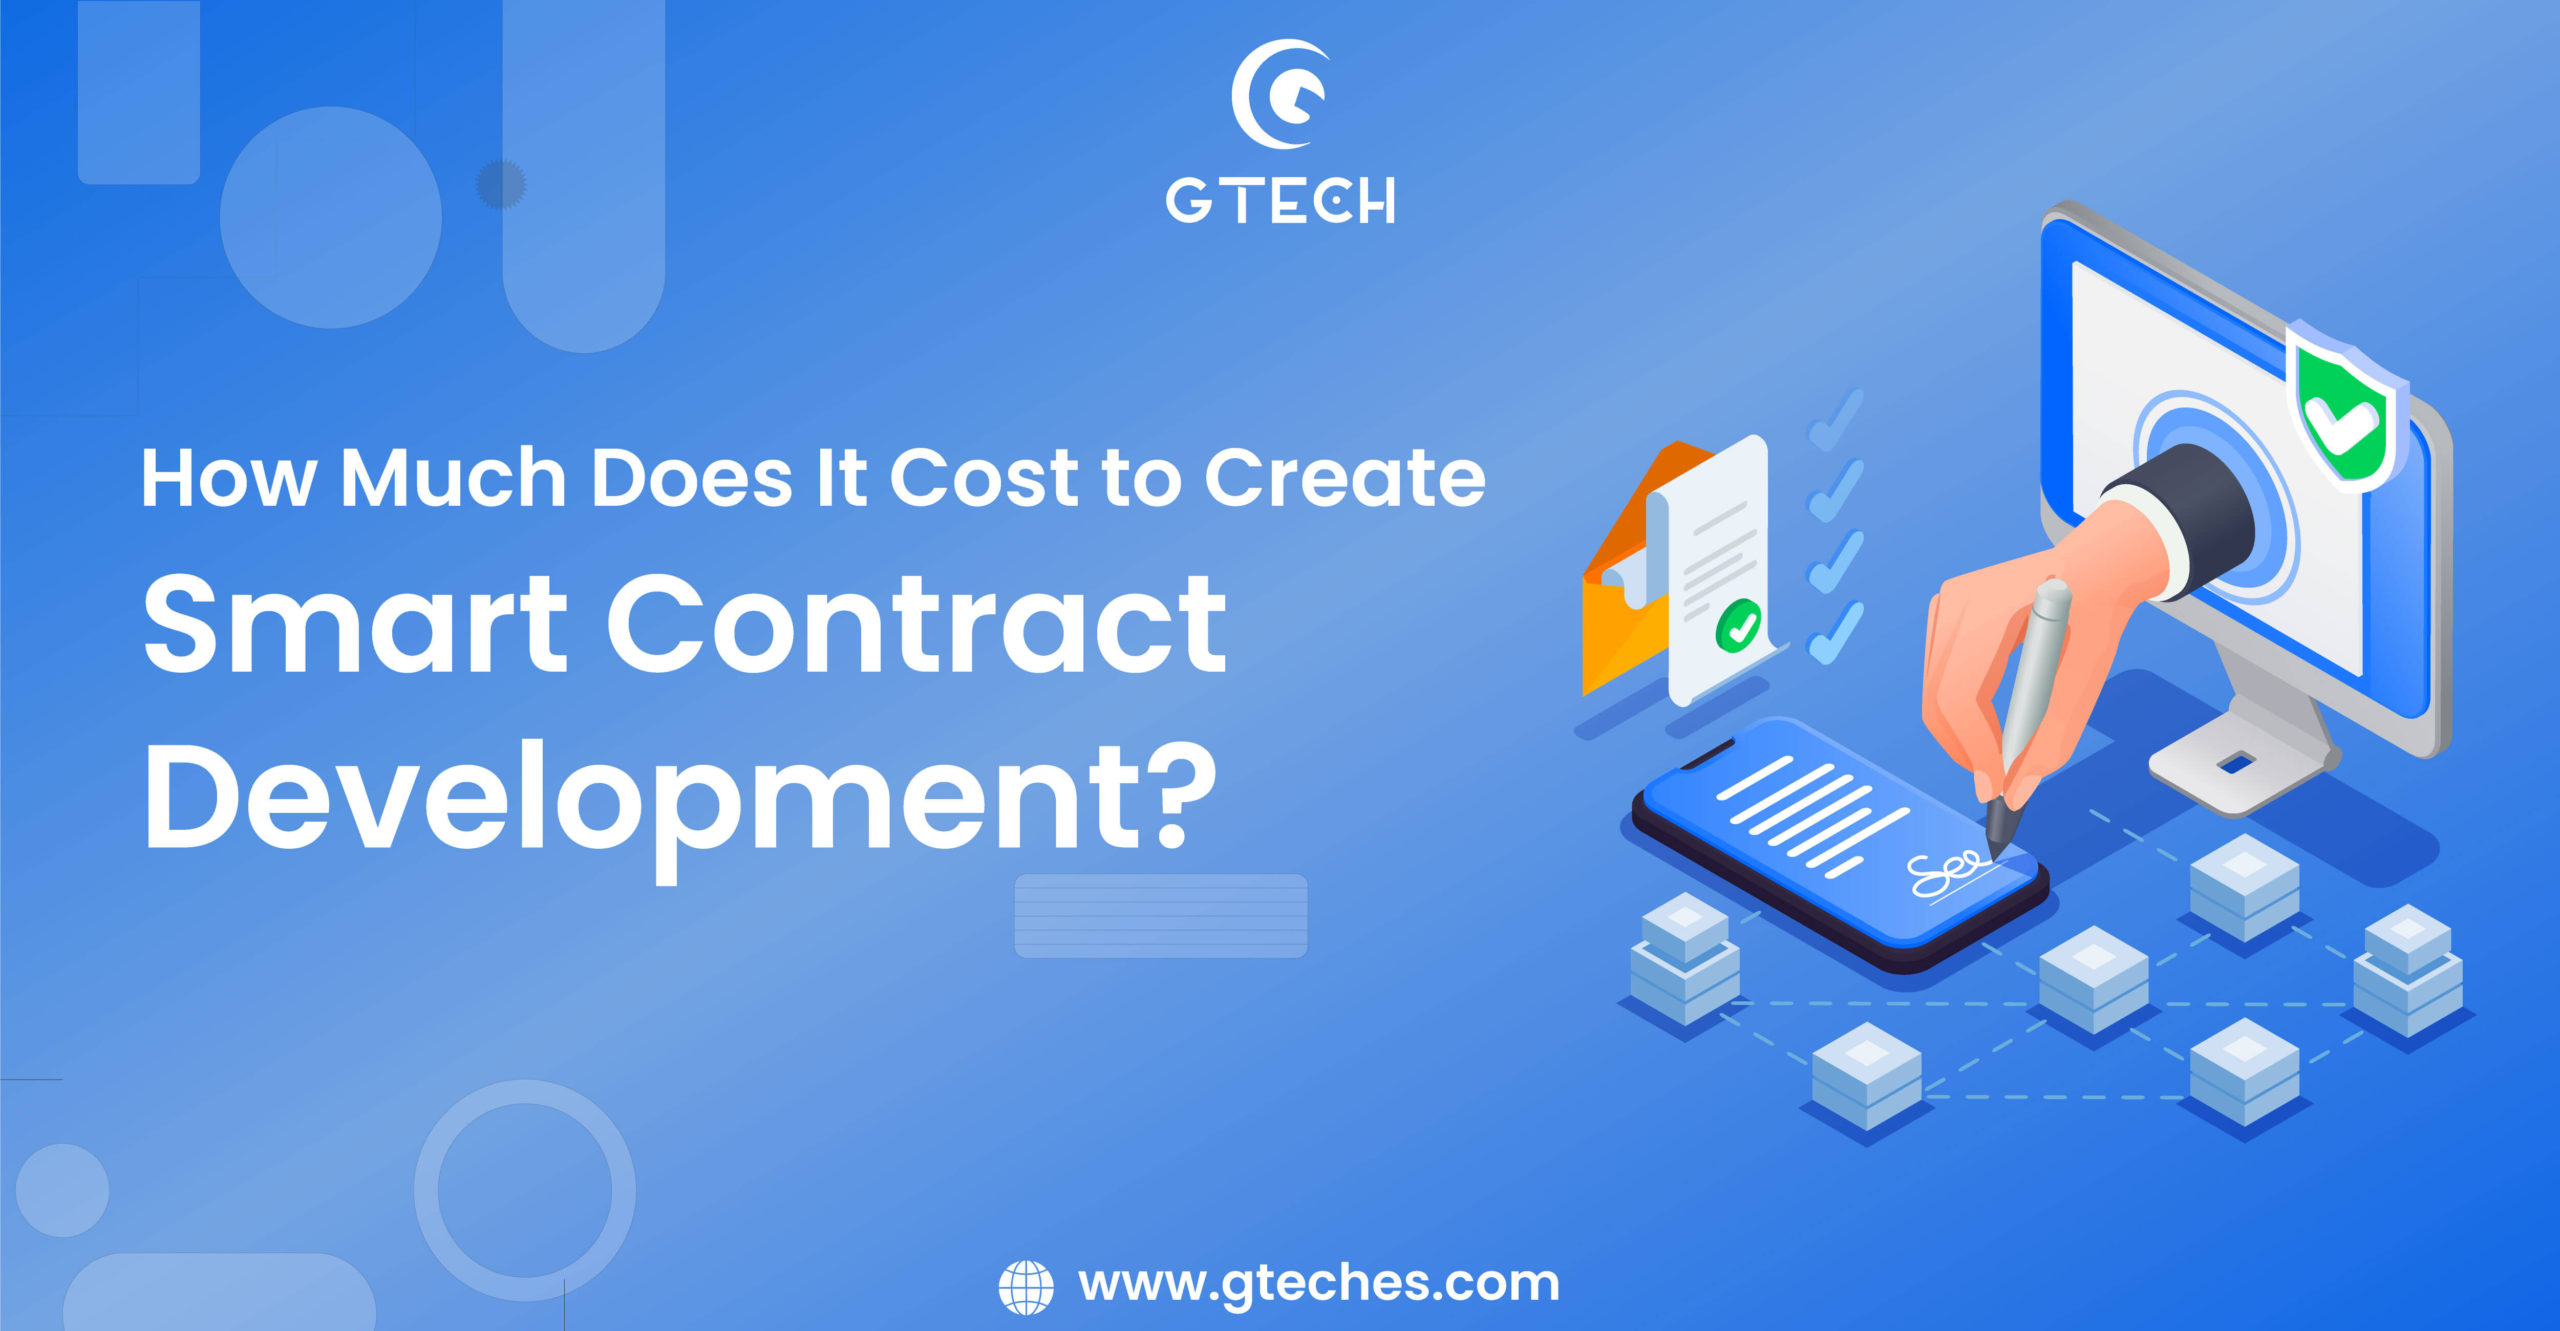 How Much Does It Cost to Create Smart Contract Development?